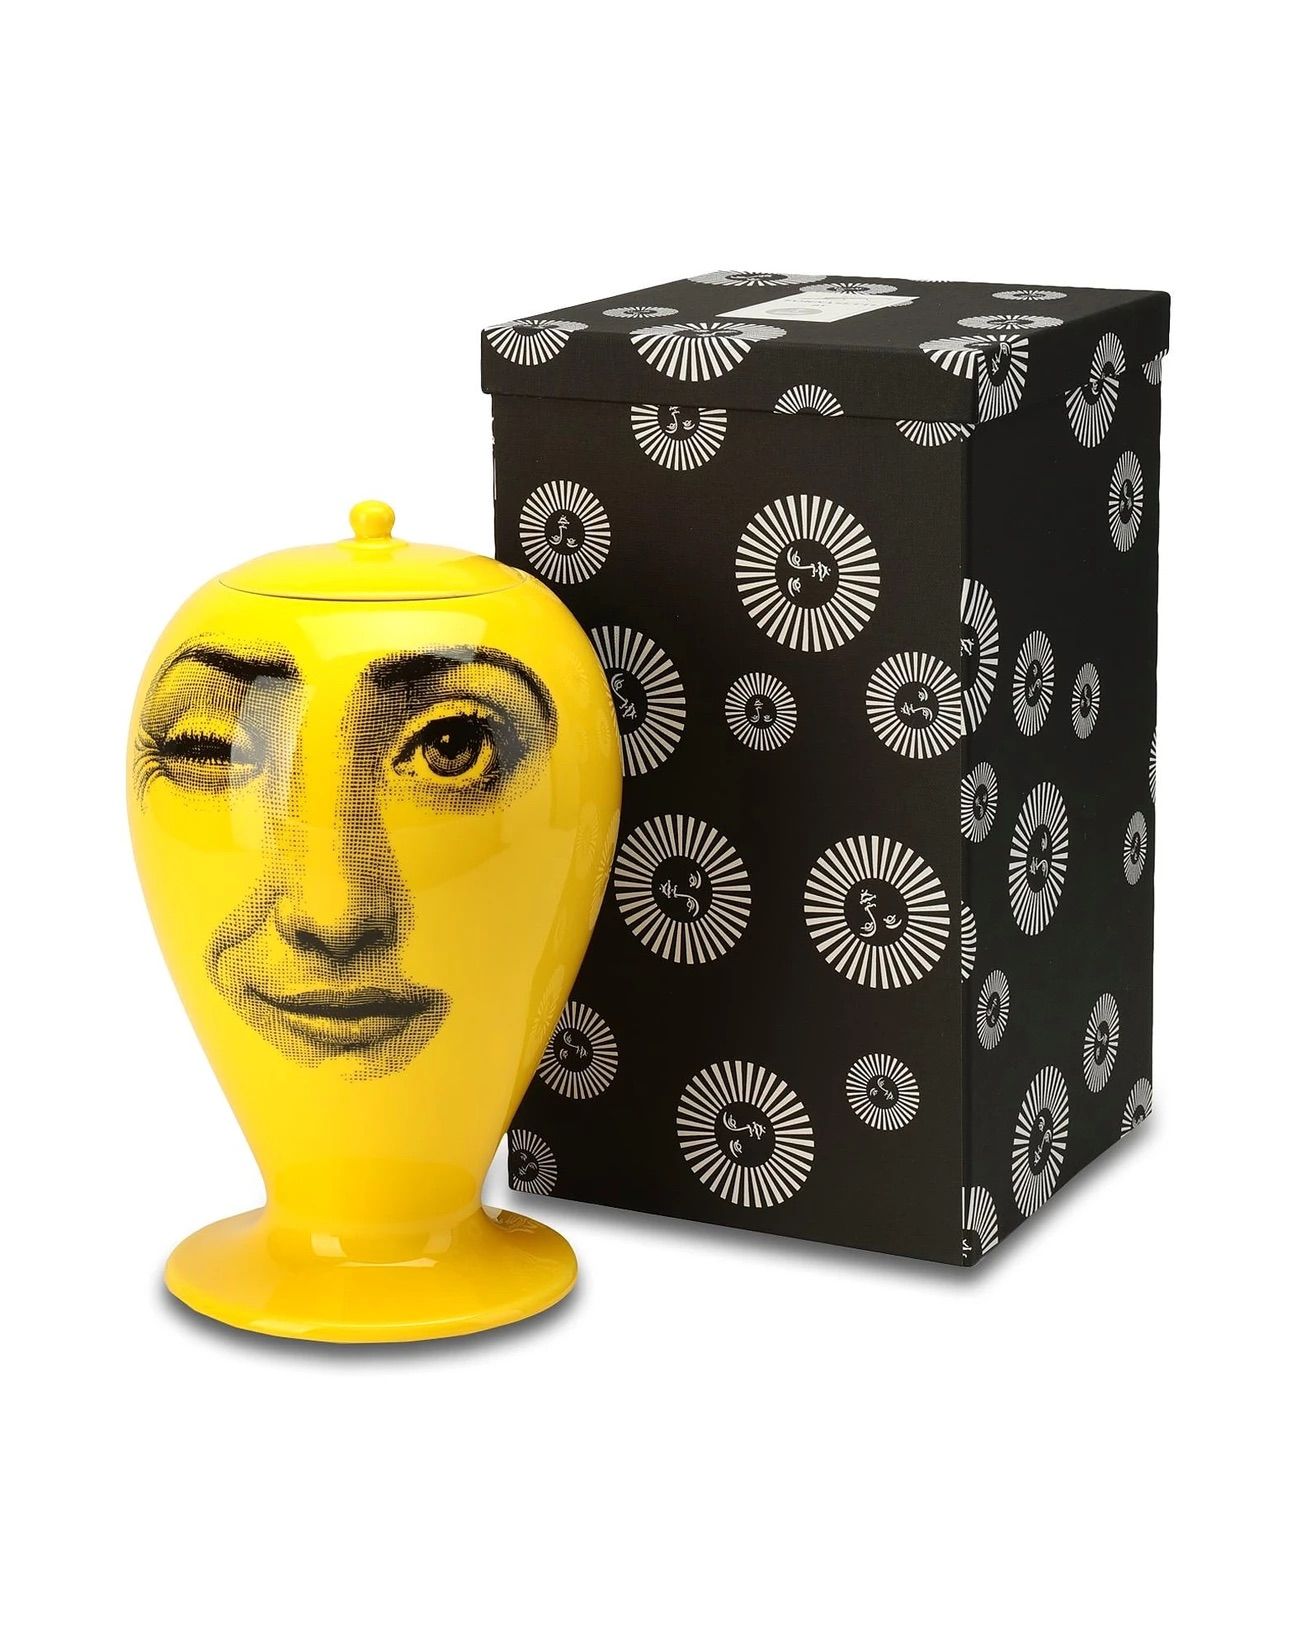 YEET HOME- FORNASETTI VASE available NOW on viaparioli.com - Free shipping. Use our code Yeetsentmehere 20% discount